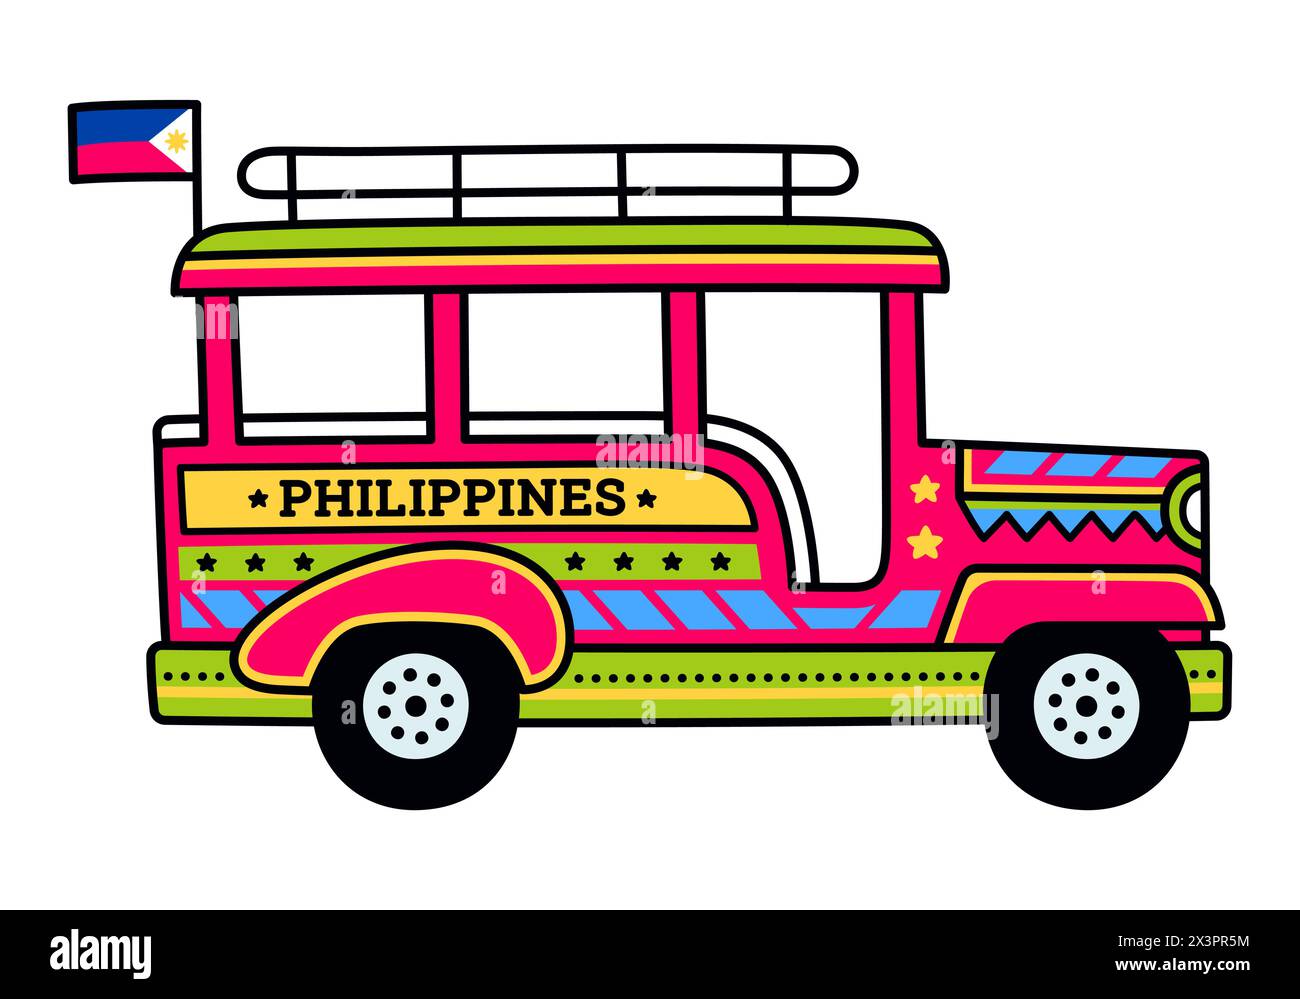 Jeepney, traditional public transport in Philippines. Bright painted bus taxi cartoon drawing, vector illustration. Stock Vector